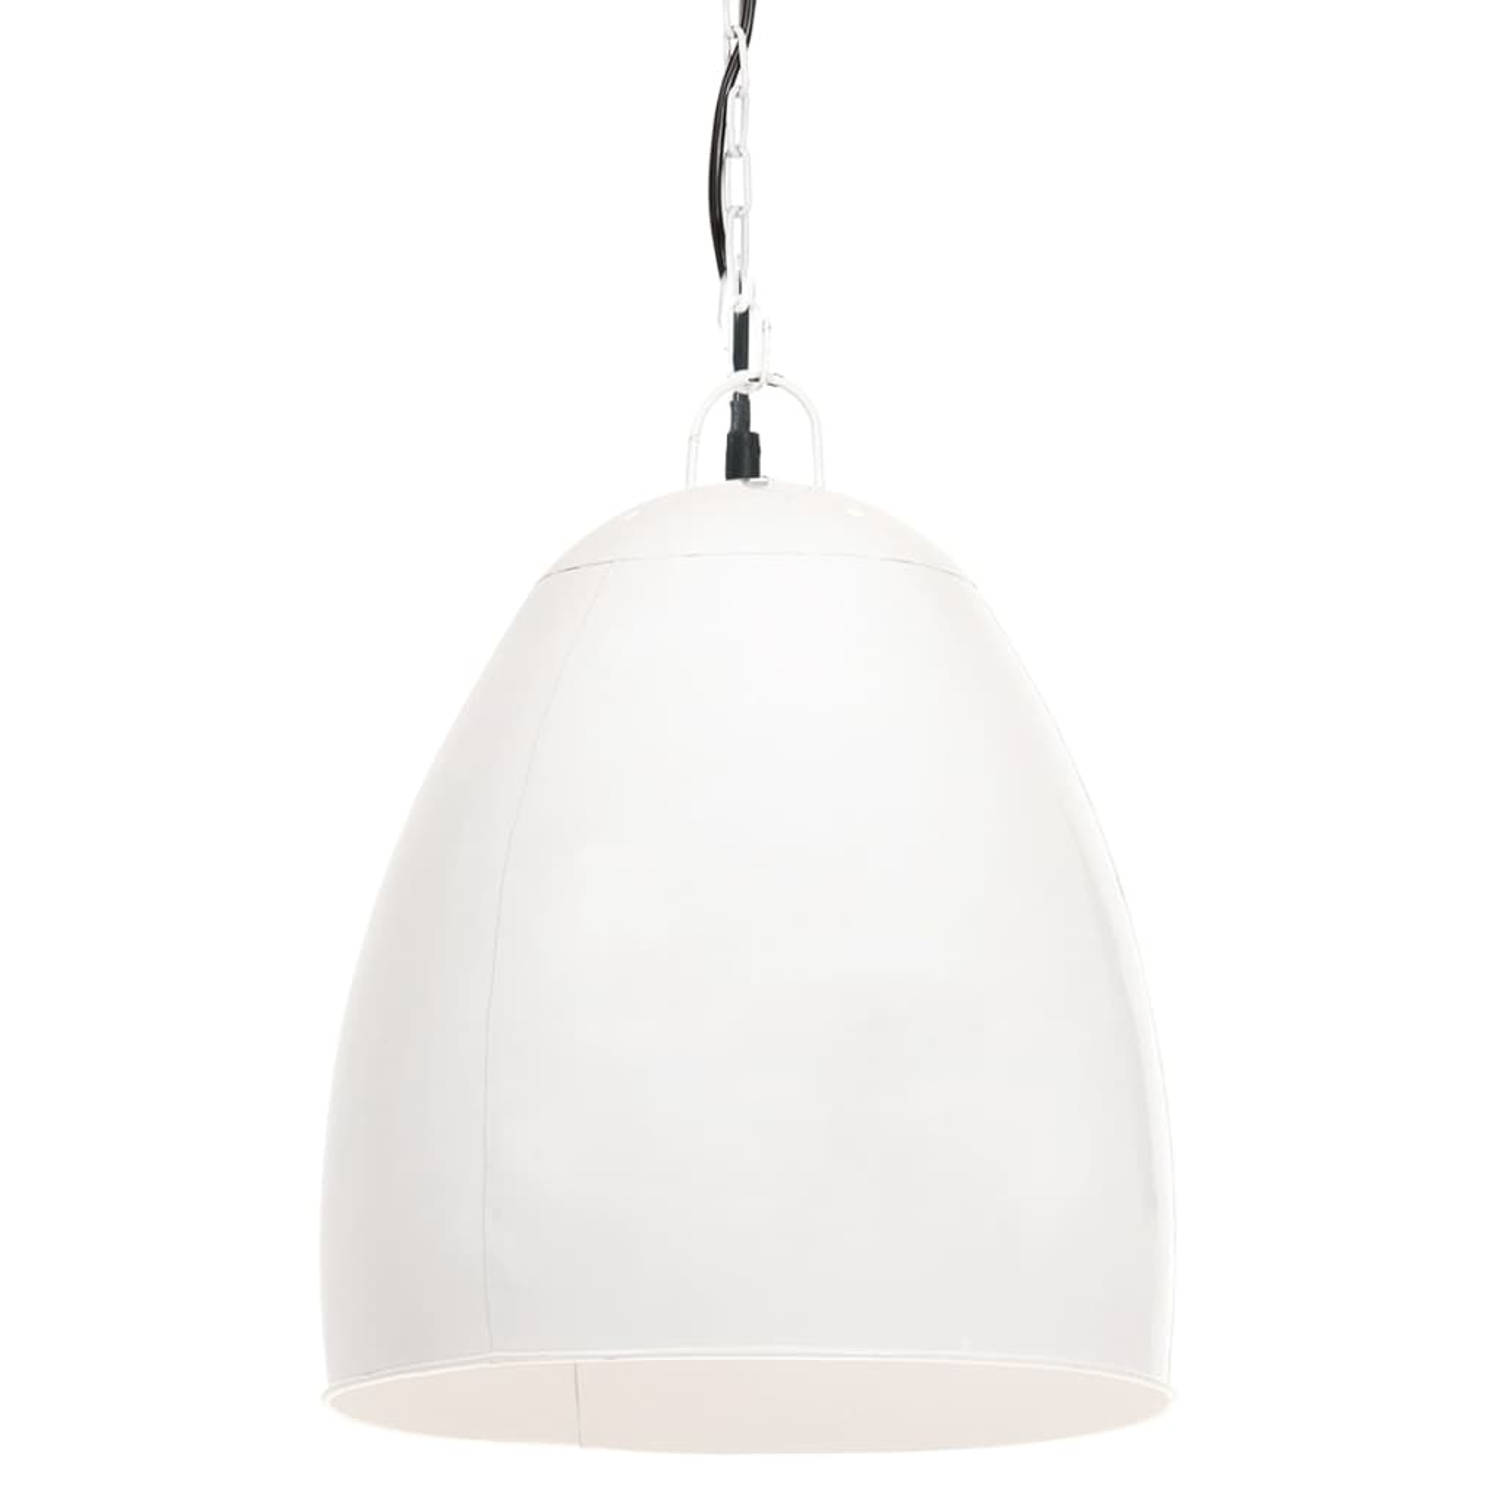 The Living Store Hanglamp Industriële Stijl - 42x52 cm - Wit Ijzer - E27 fitting - Max - 25W